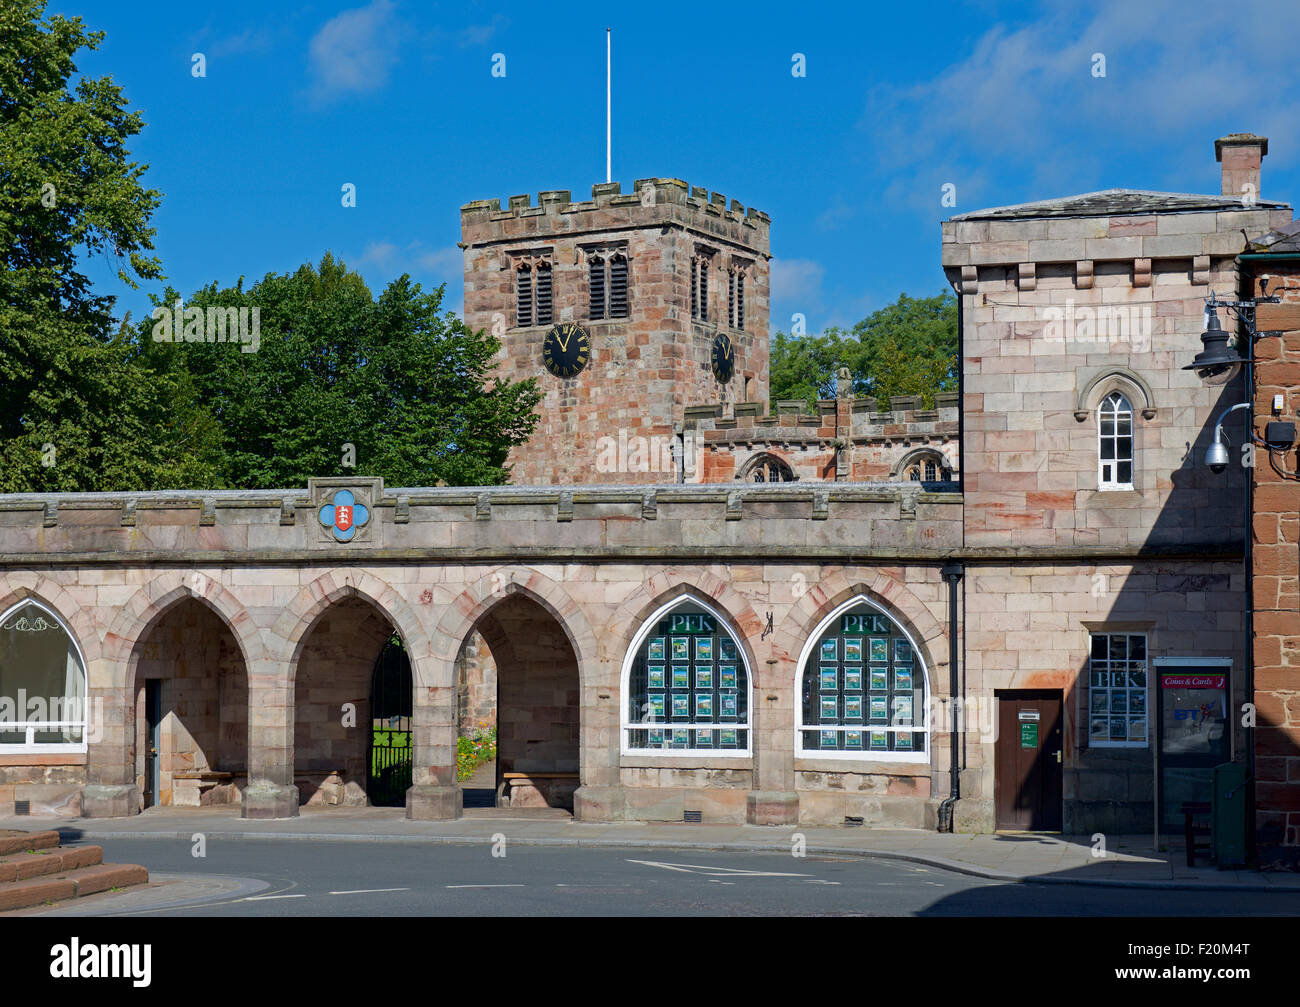 Cloisters and St Lawrence's Church, Appleby, Cumbria, England UK Stock Photo